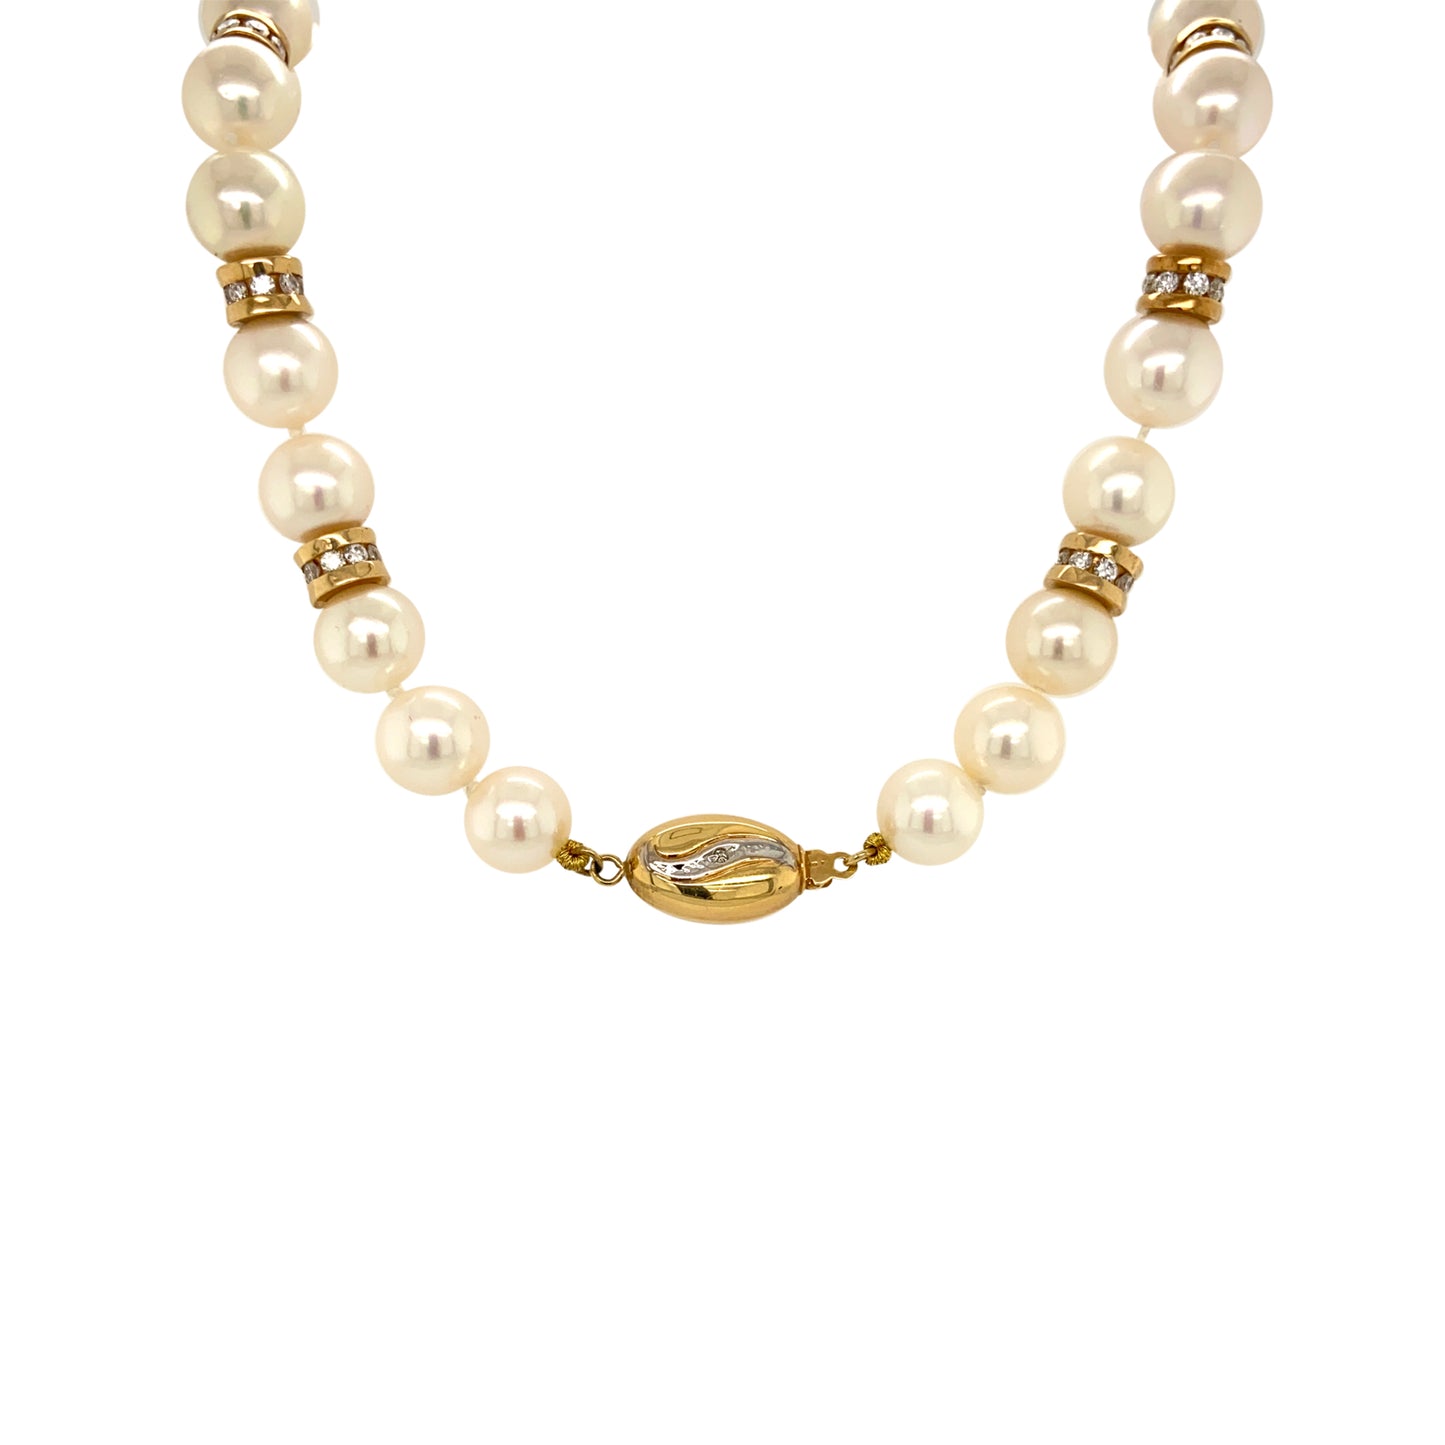 Diamond Roundels & Pearl Necklace in 14K Yellow Gold